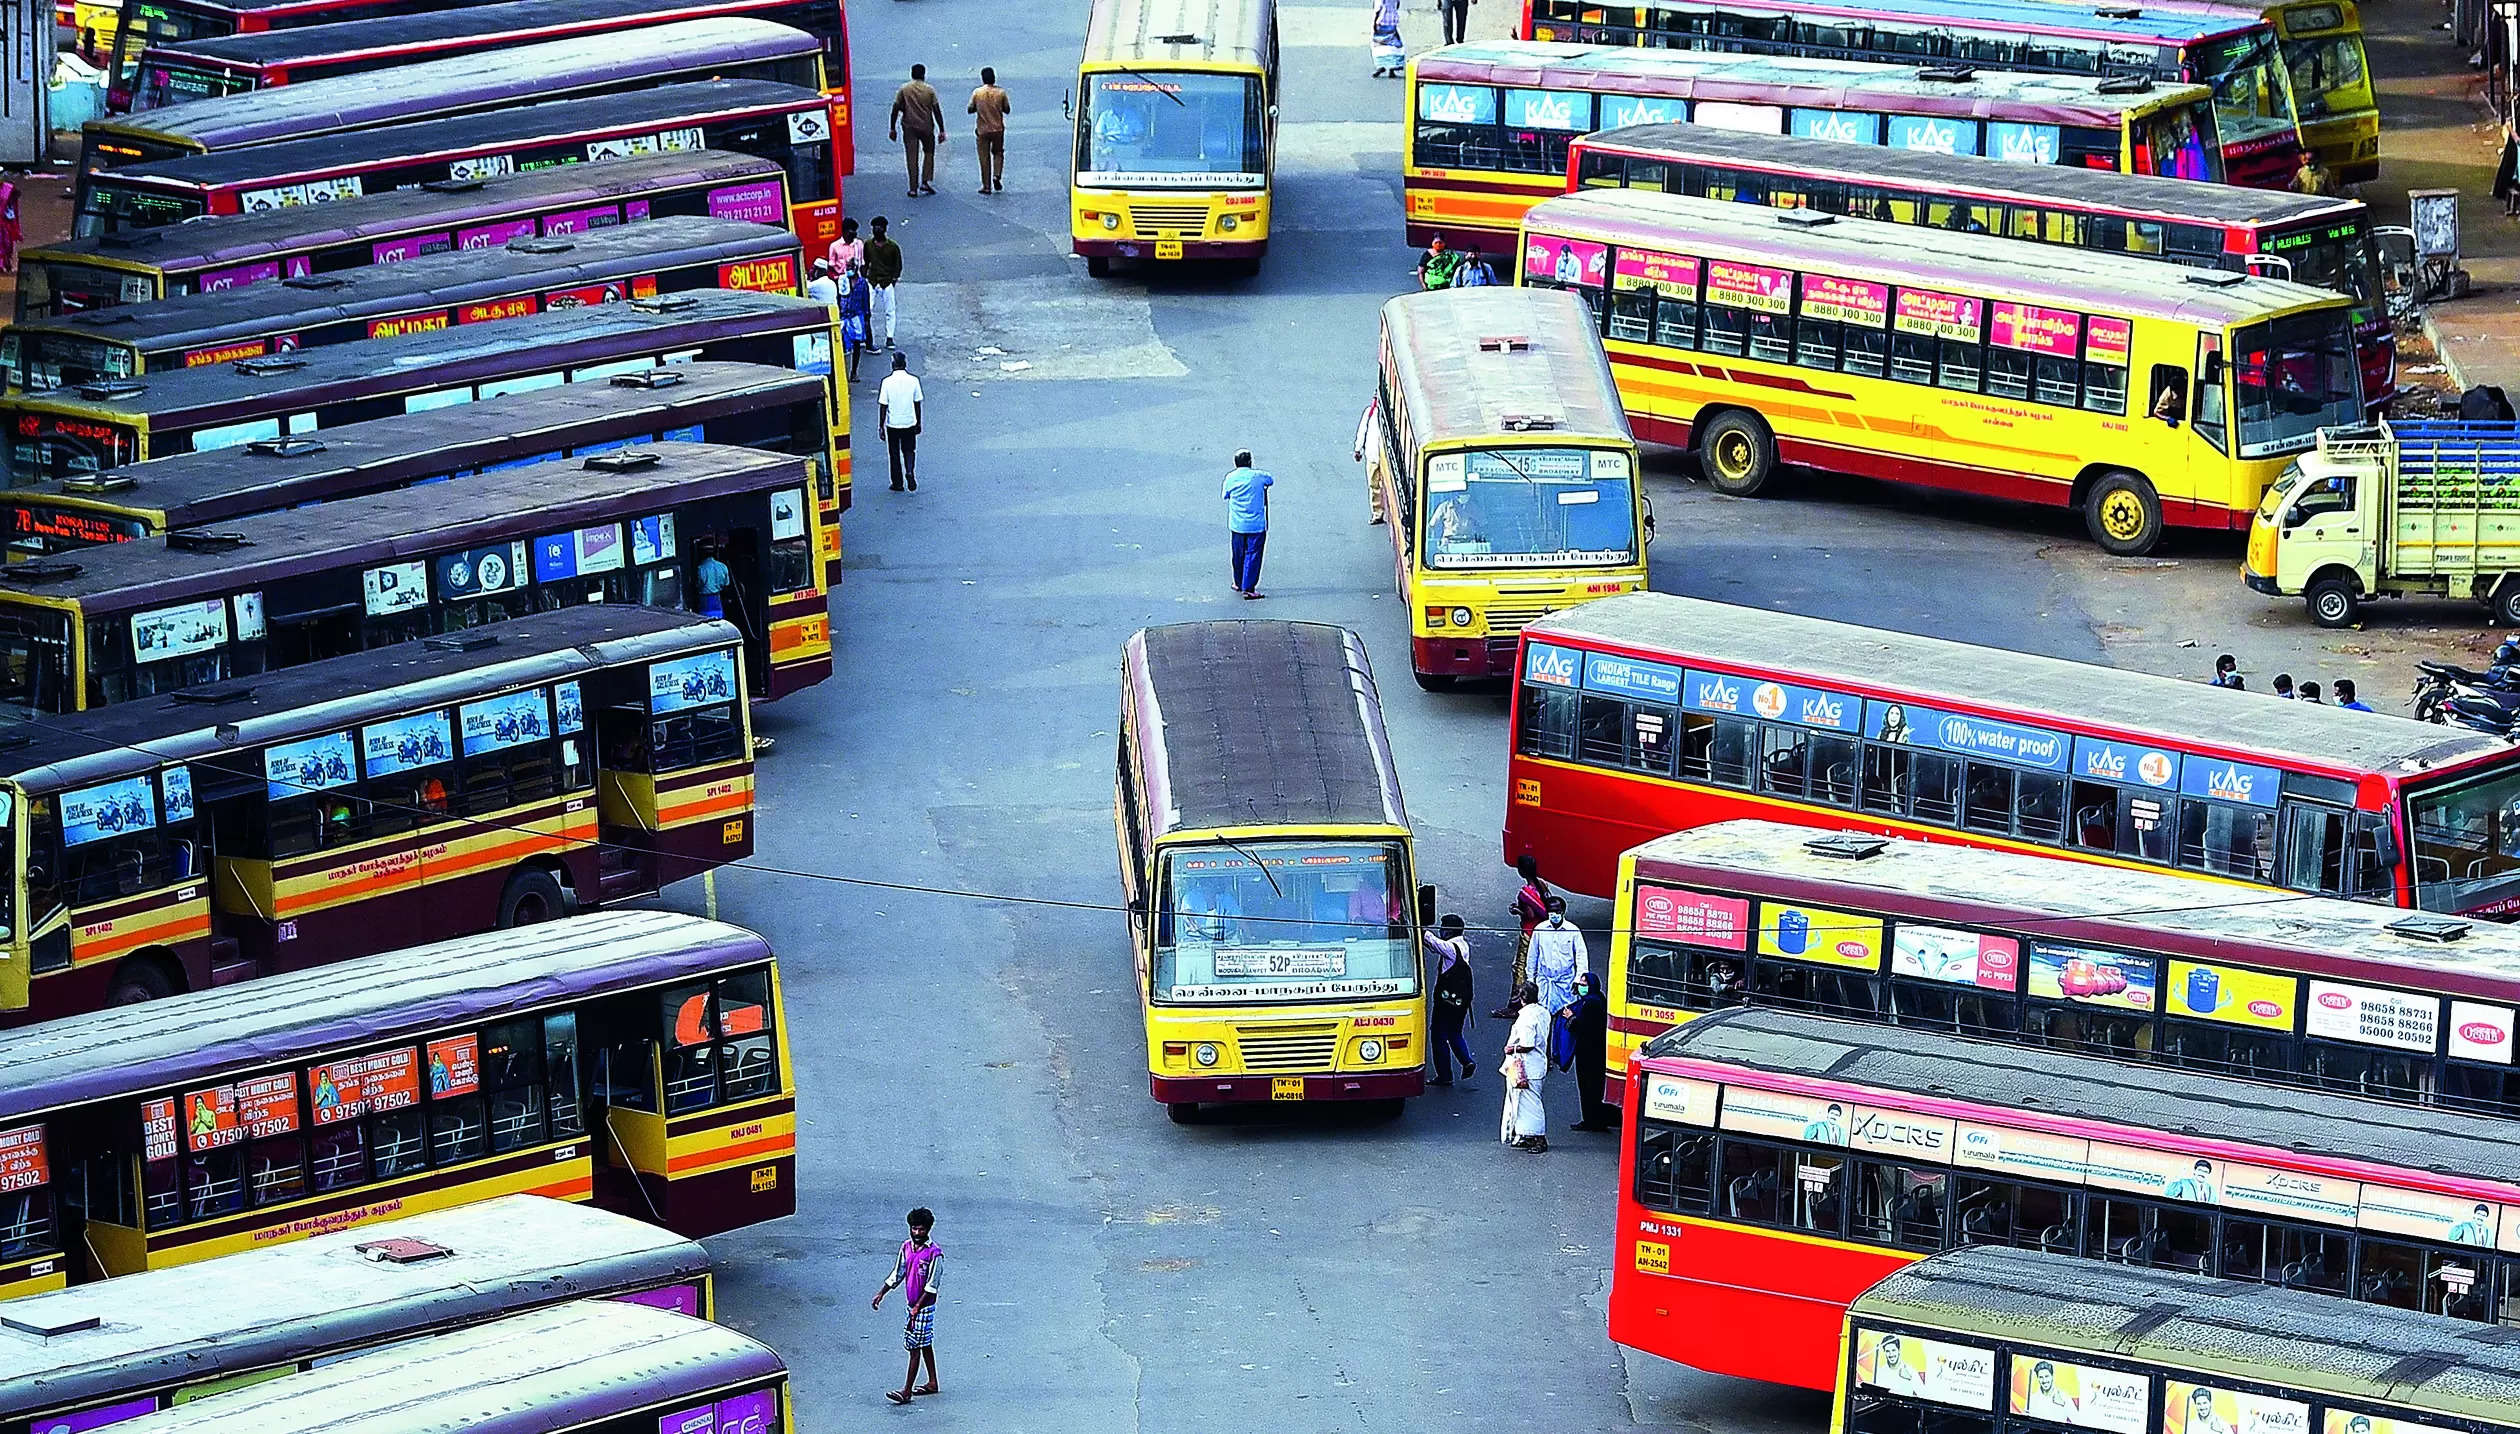 <p>The Ramanathapuram region of TNSTC Kumbakonam, serving Ramanathapuram and Sivagangai districts, achieved 75% bus operations on Tuesday, with plans to scale up to 100% by Wednesday, according to officials.</p>